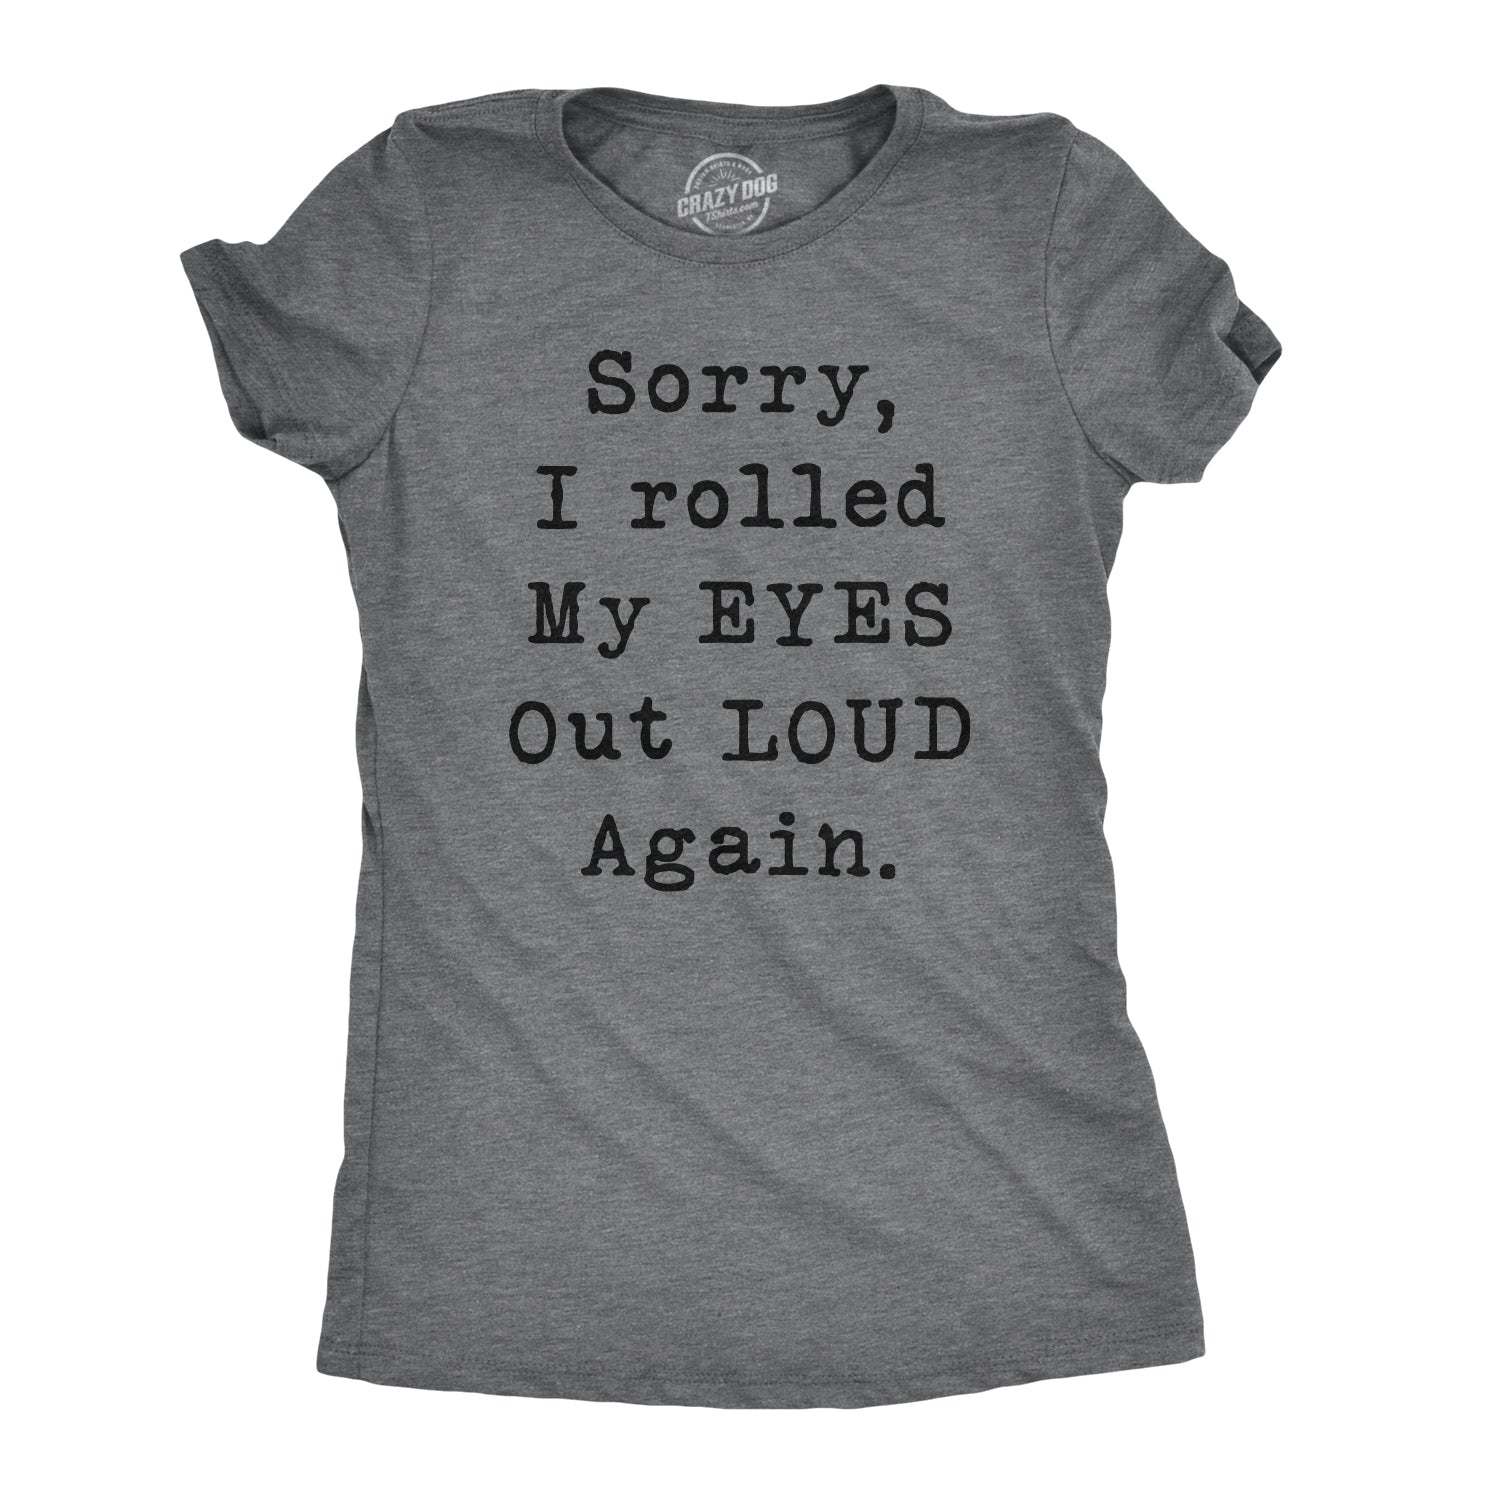 15 Most Sarcastic T-Shirts For Ladies